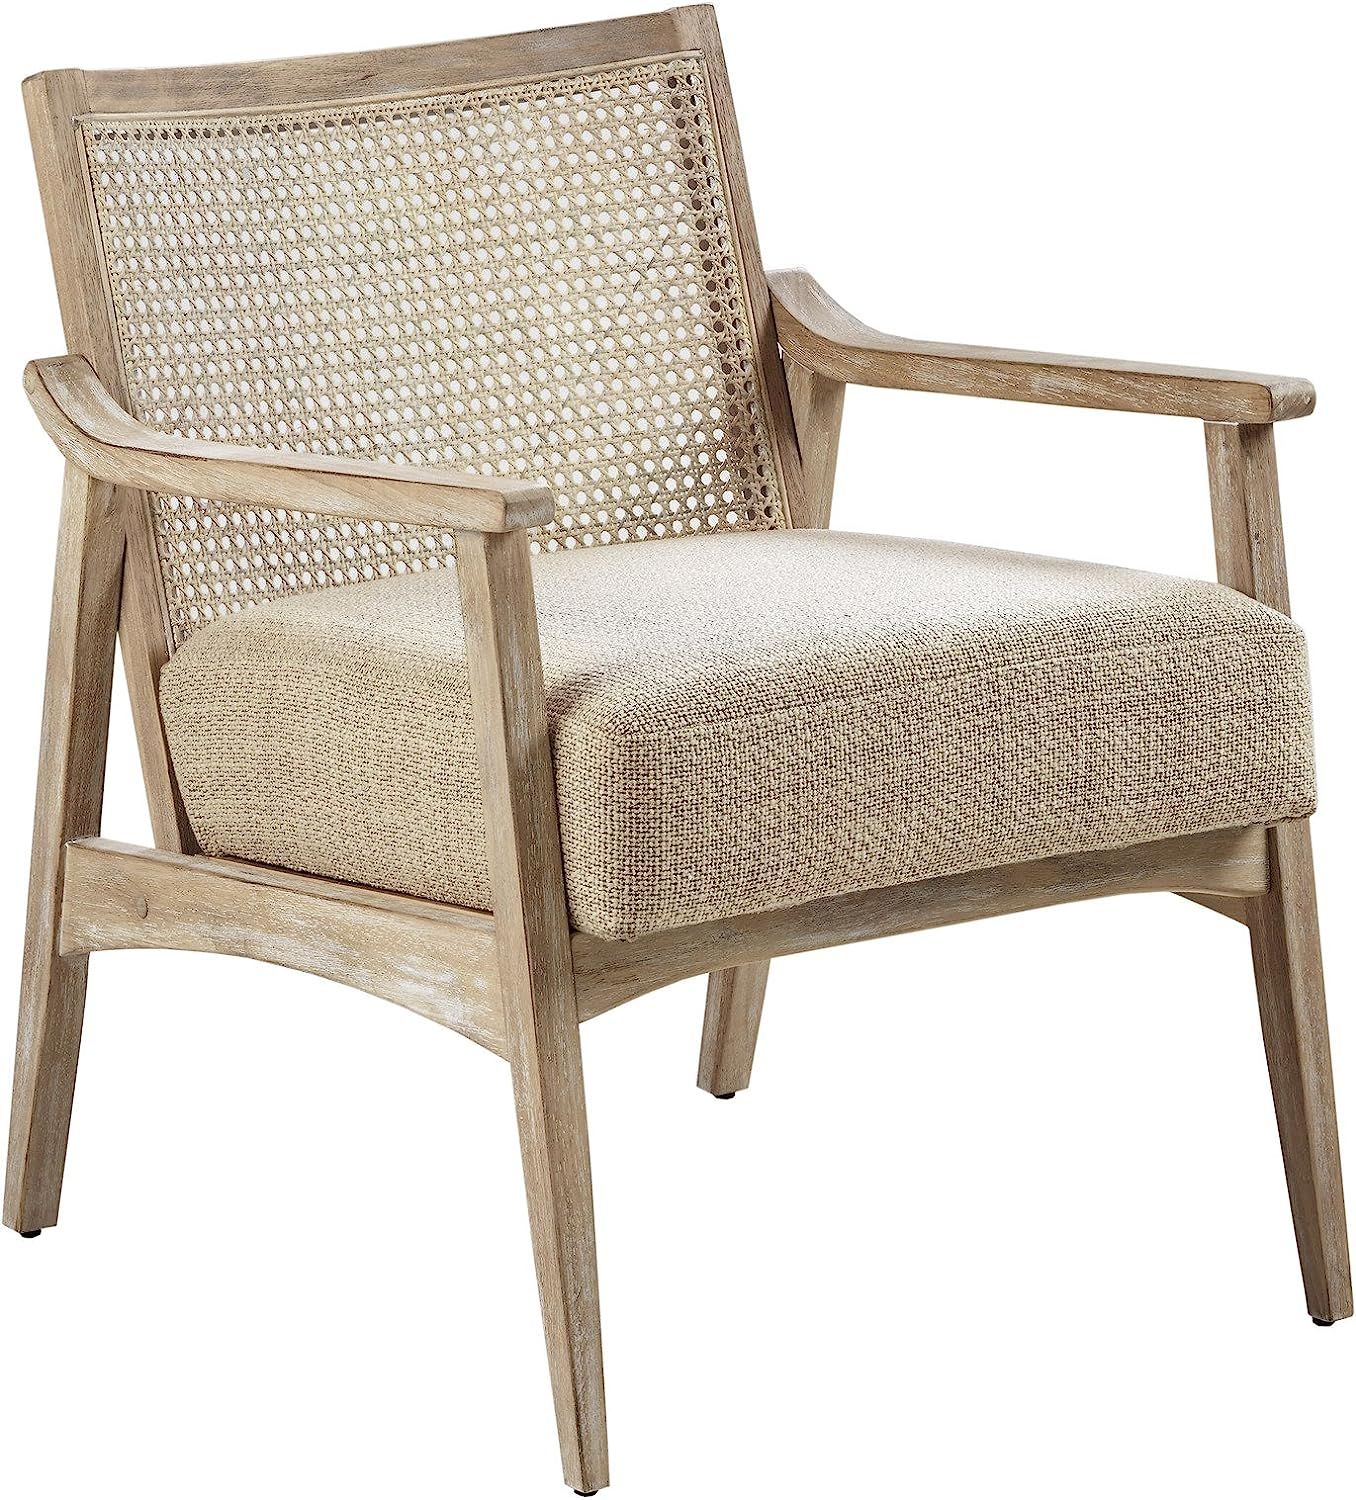 INK+IVY Kelly Accent Chair, Light Brown | Amazon (US)